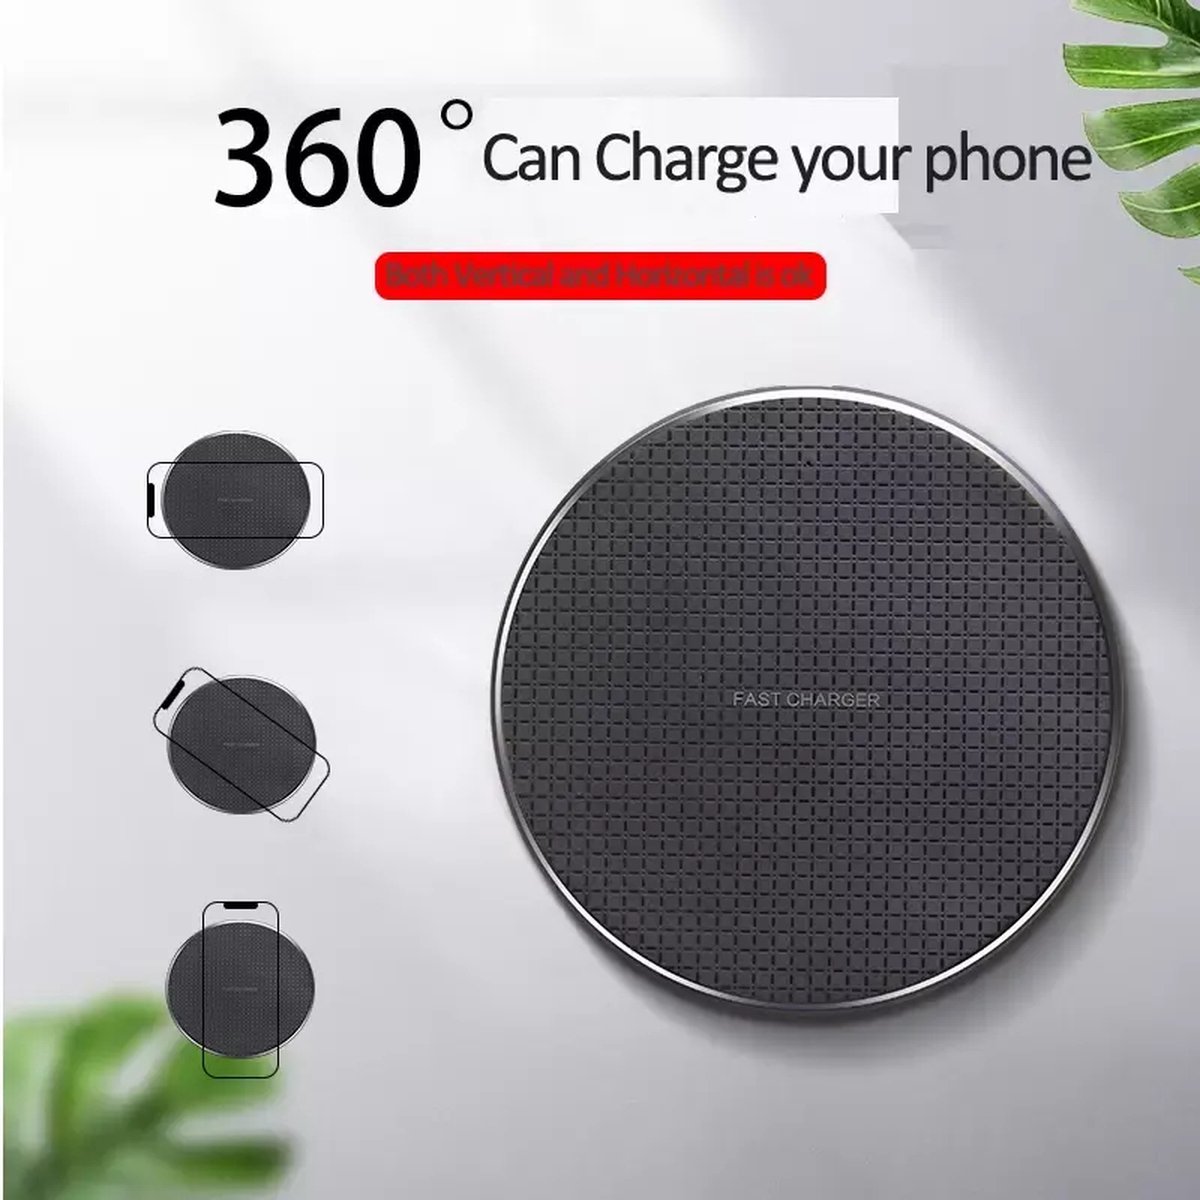 Wireless fast charger 10W